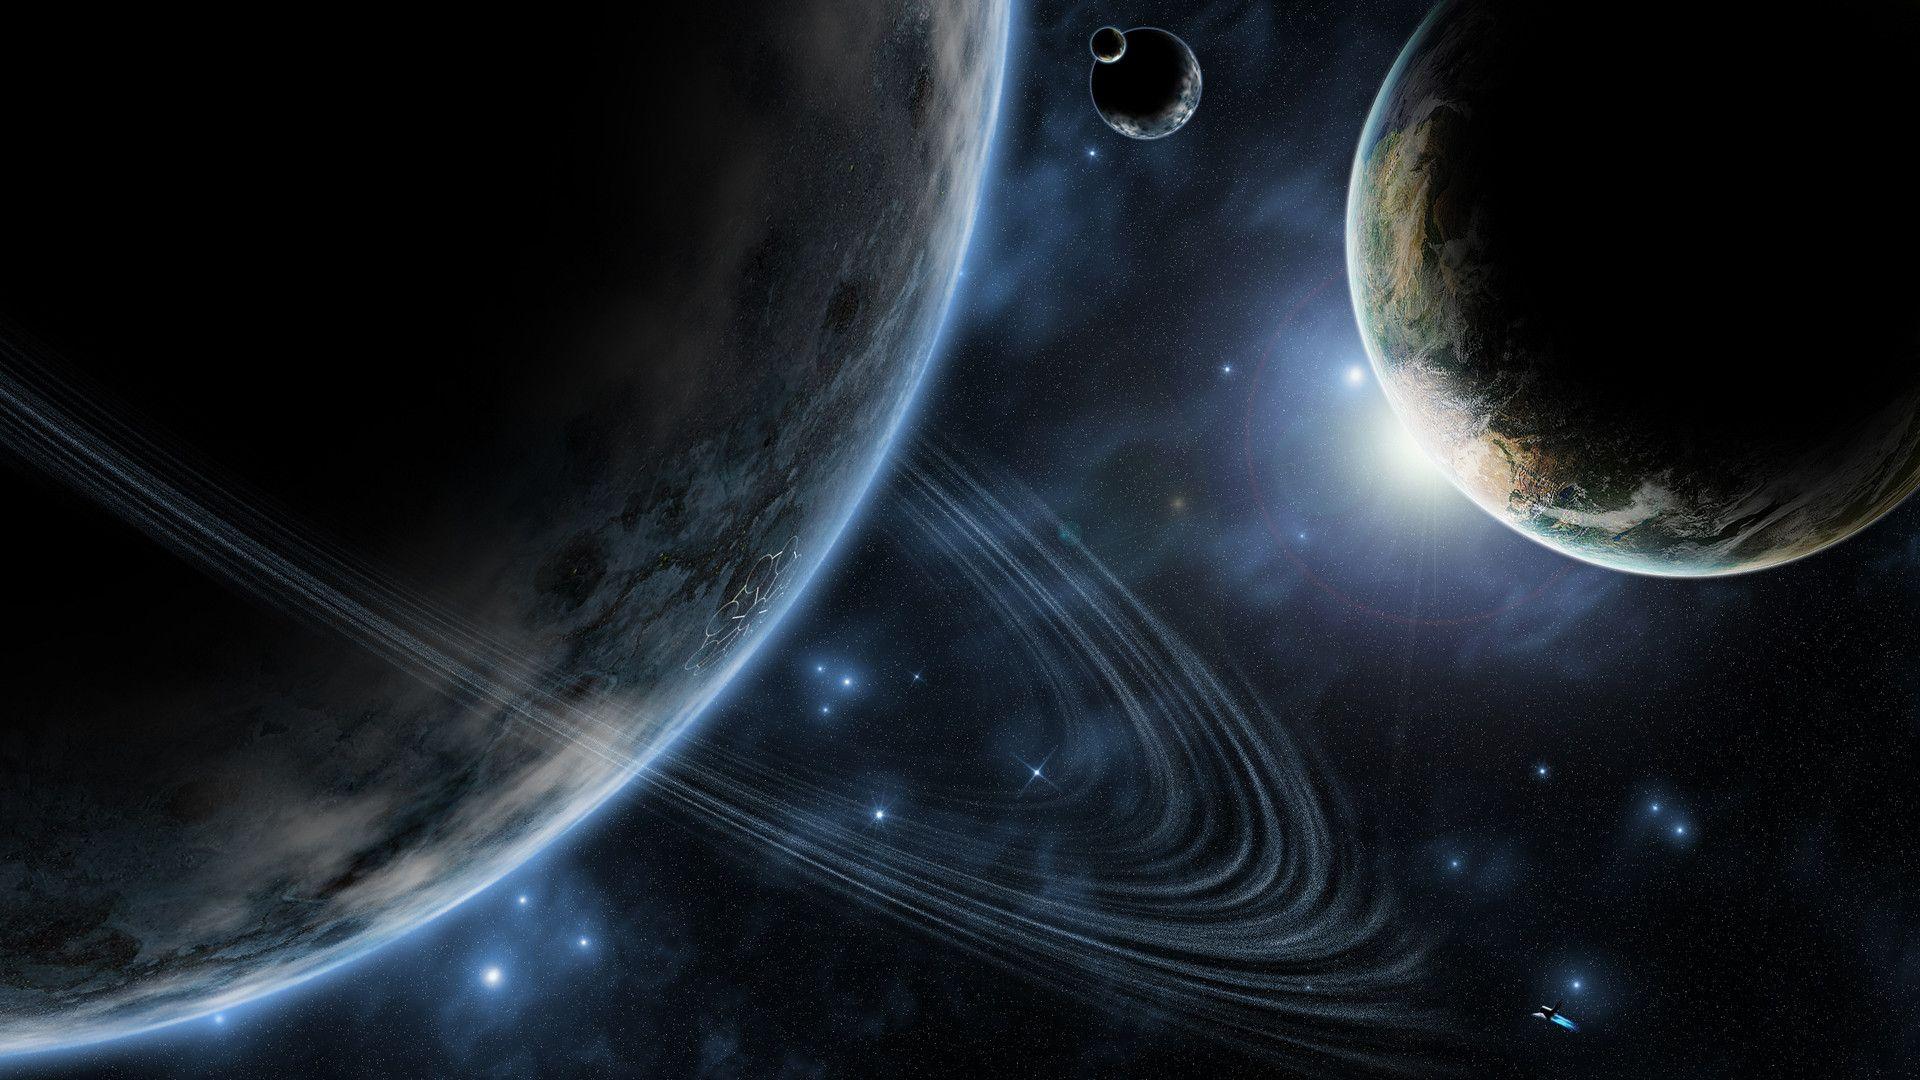 Space Backgrounds Hd 1920x1080 Image & Pictures